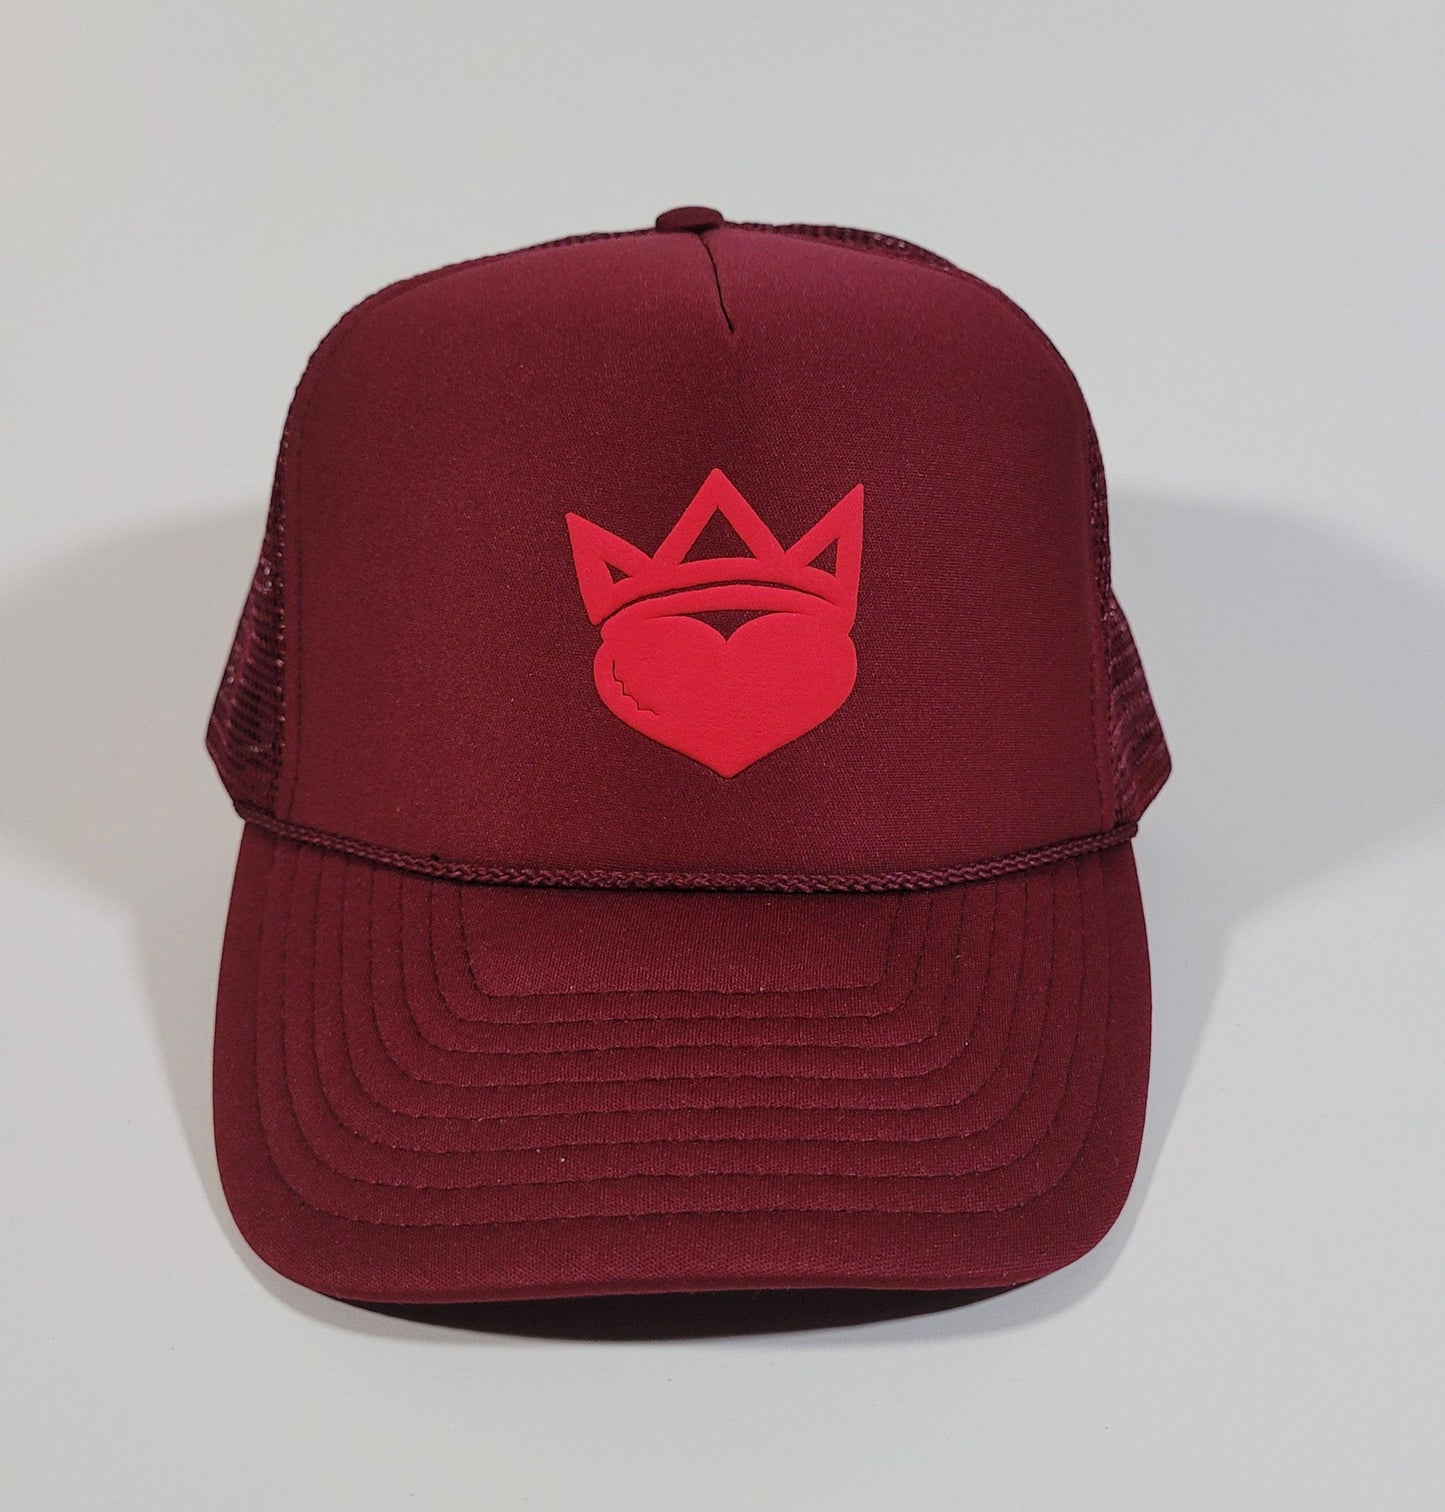 Maroon & Red "King/Queen Of Hearts" Trucker Hat - Official Crown Store